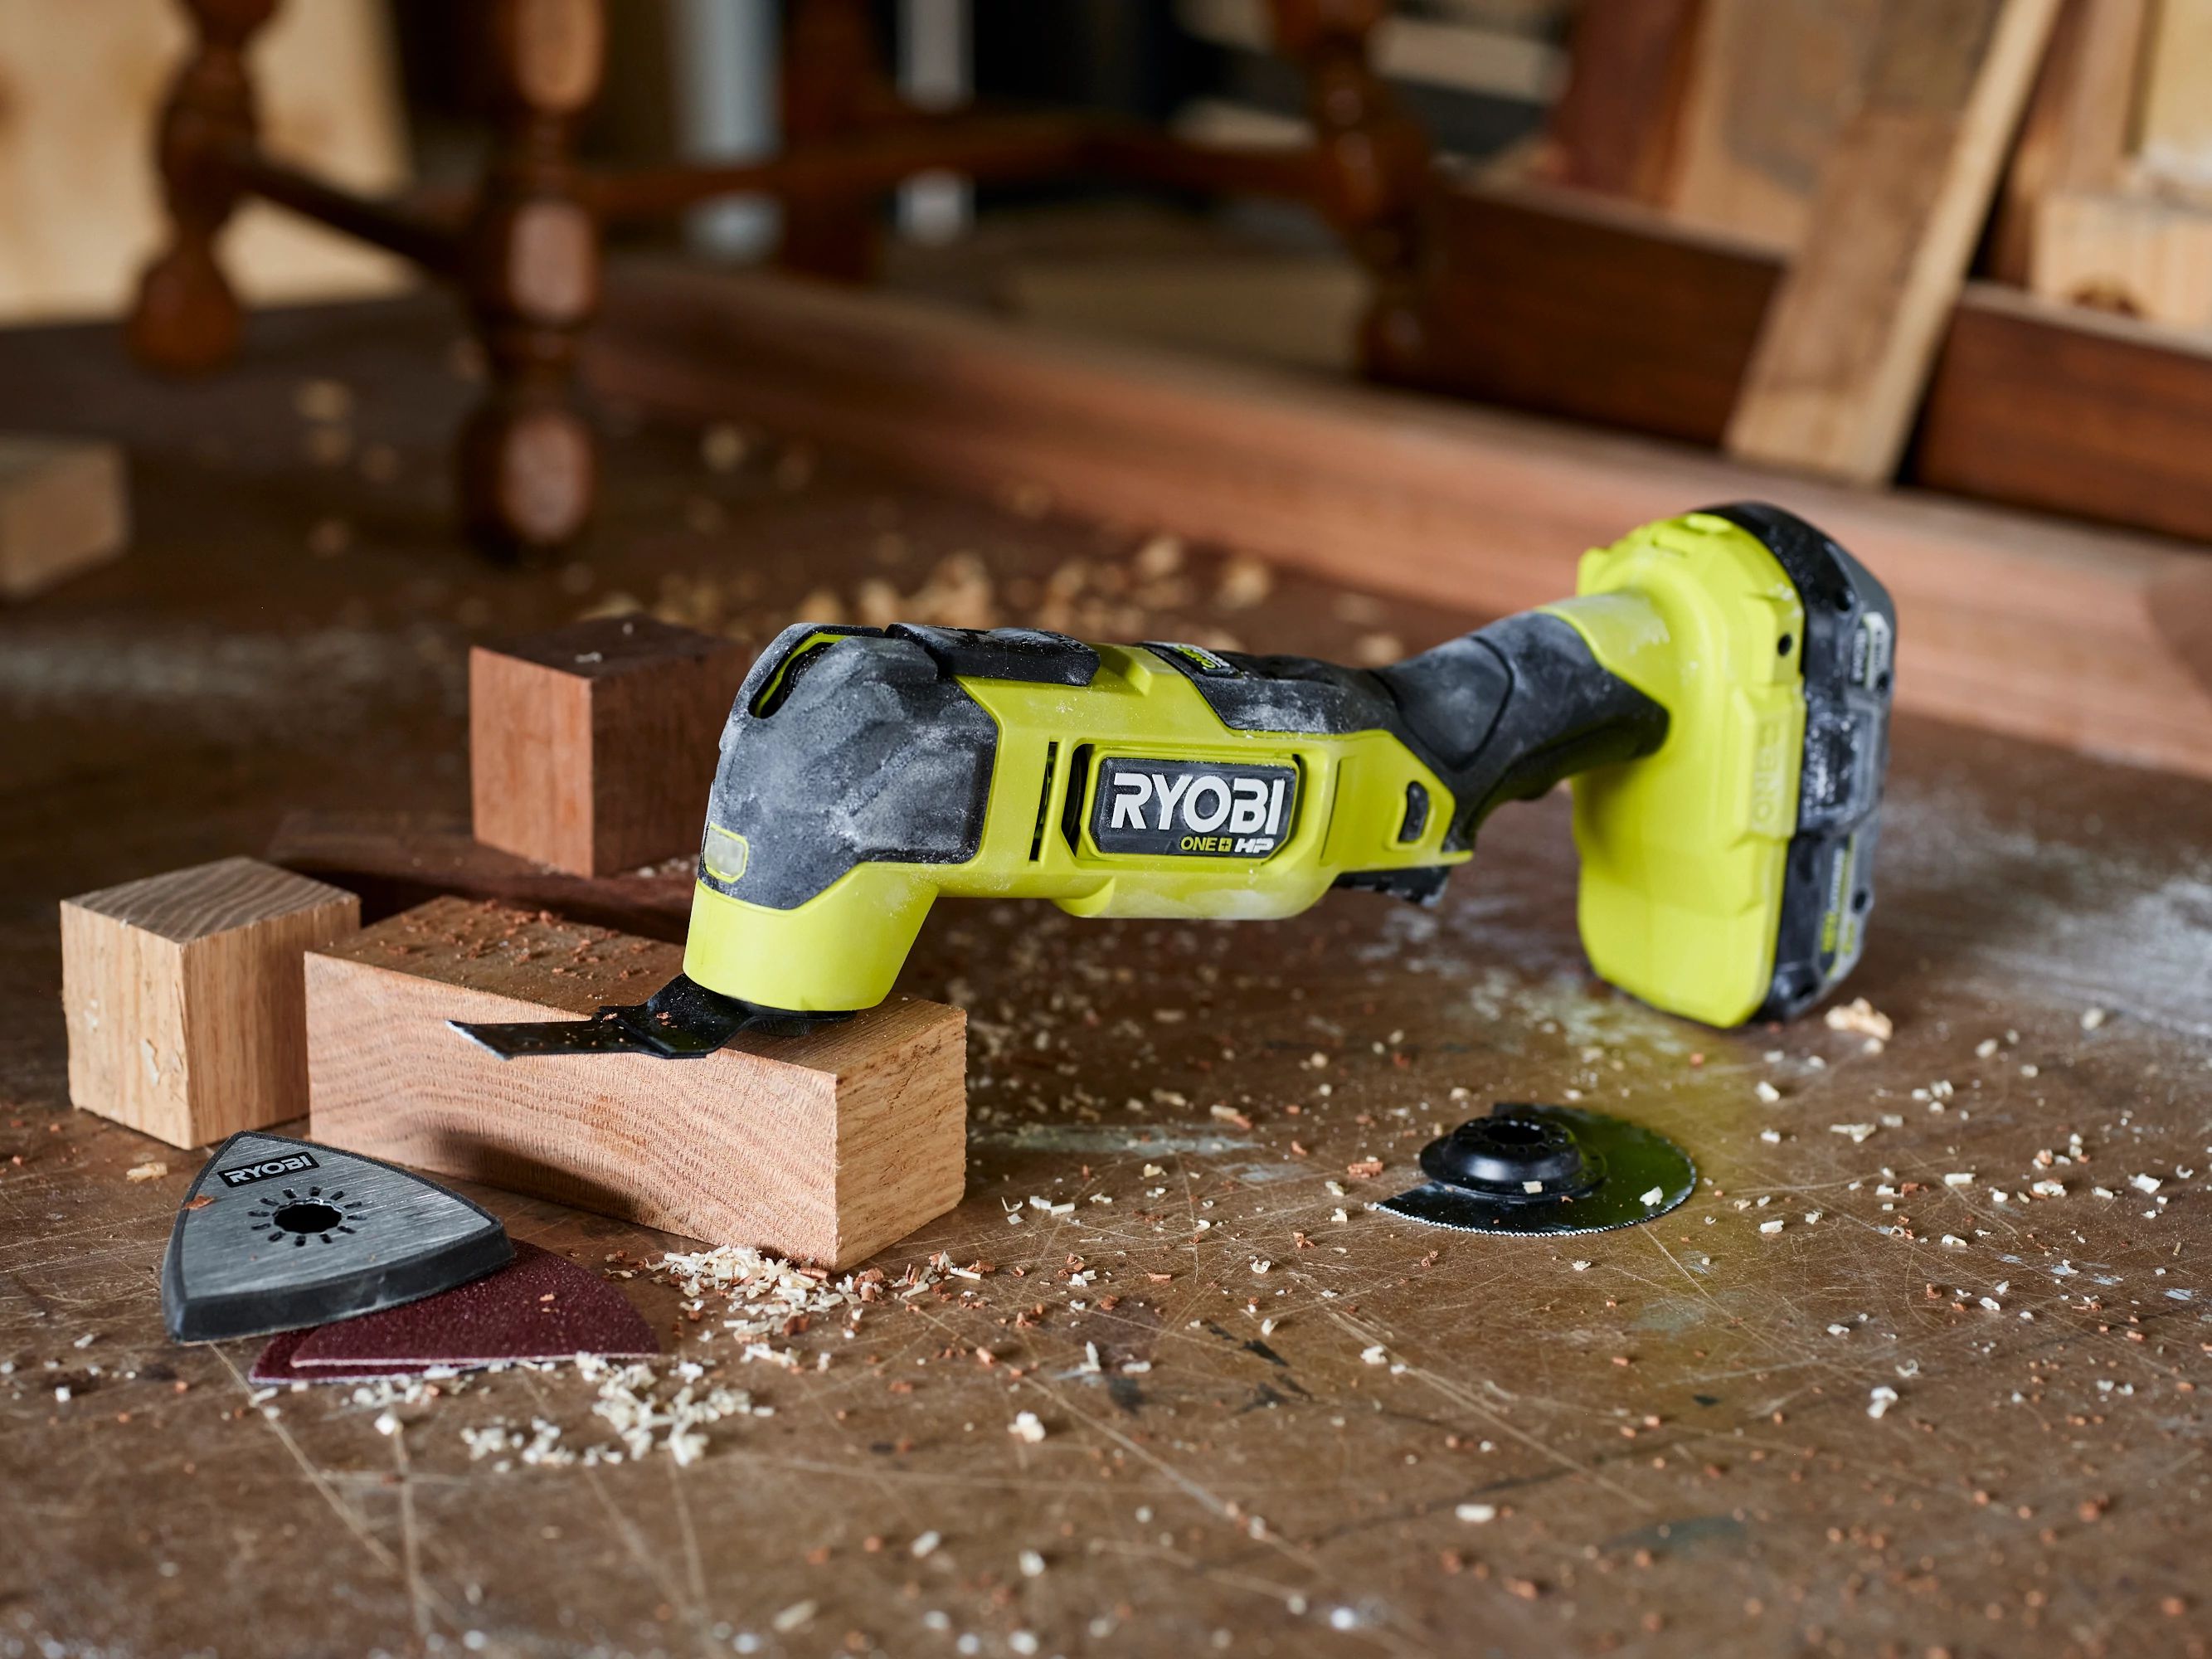 The Most Versatile Tool Around the Home or on the Job Site